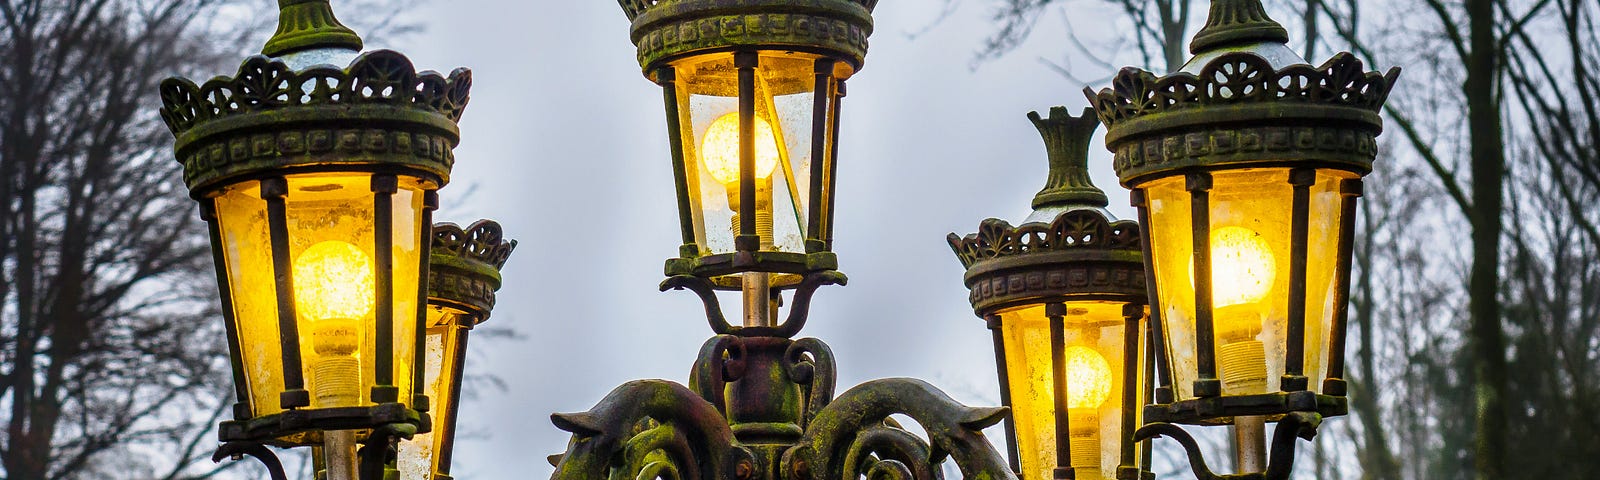 A Victorian lampost with 5-lit bulbs in individual glass canisters.